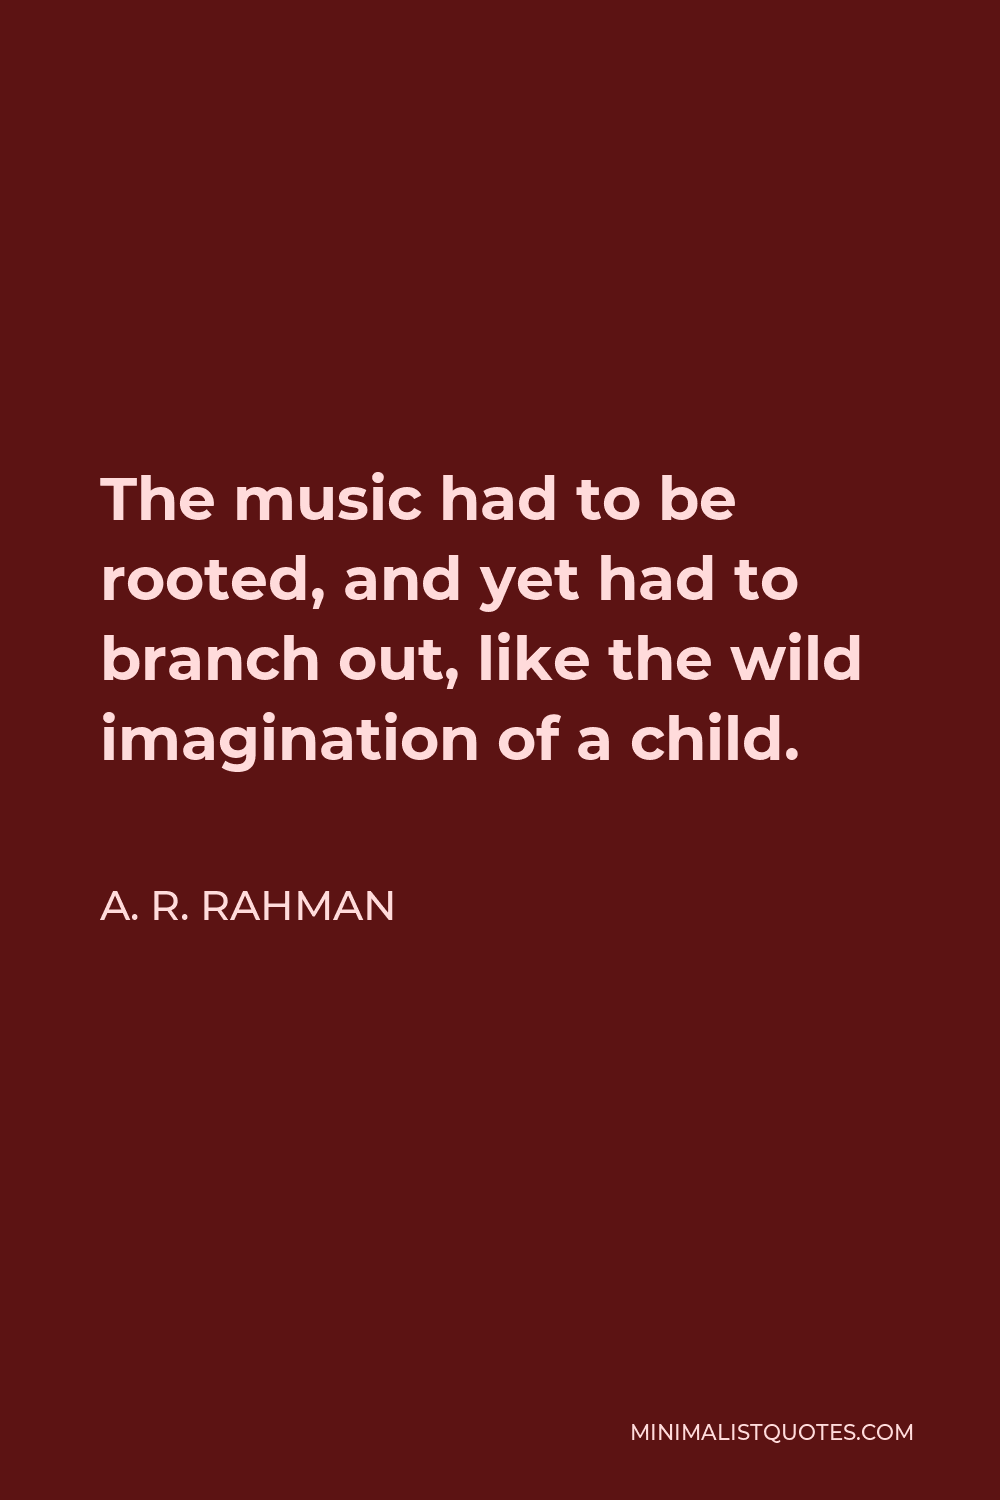 A. R. Rahman Quote - The music had to be rooted, and yet had to branch out, like the wild imagination of a child.